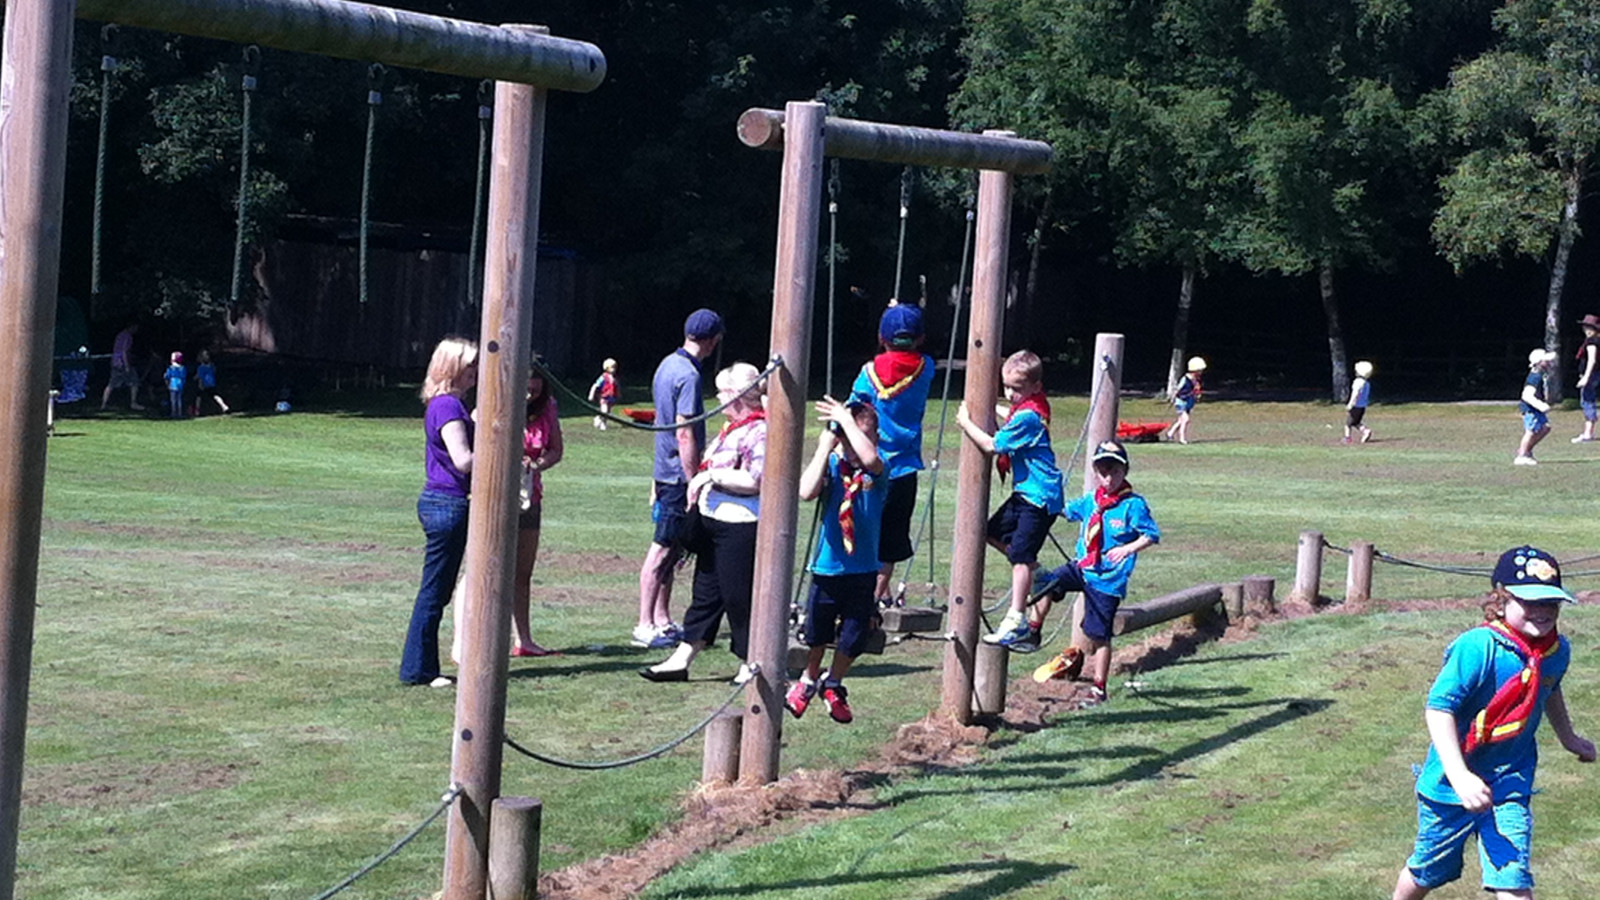 On The Assault Course